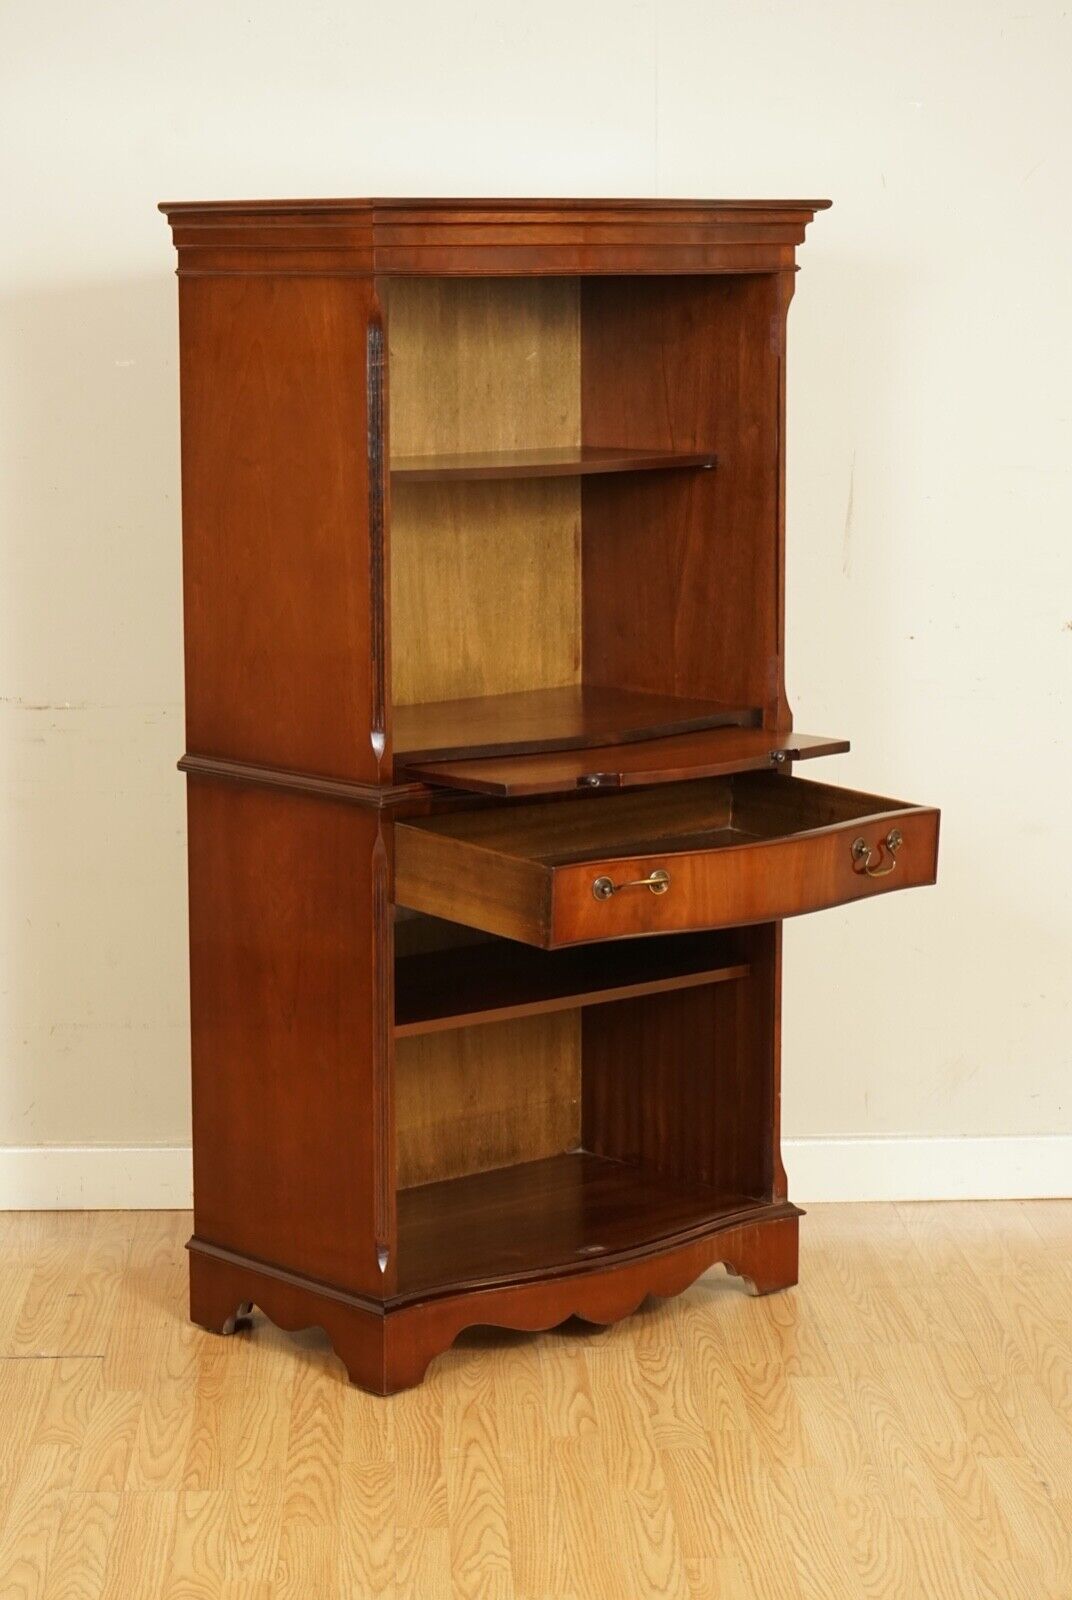 OPEN BOOKCASE CABINET WITH SHELVES SERVING TRAY AND DRAWER